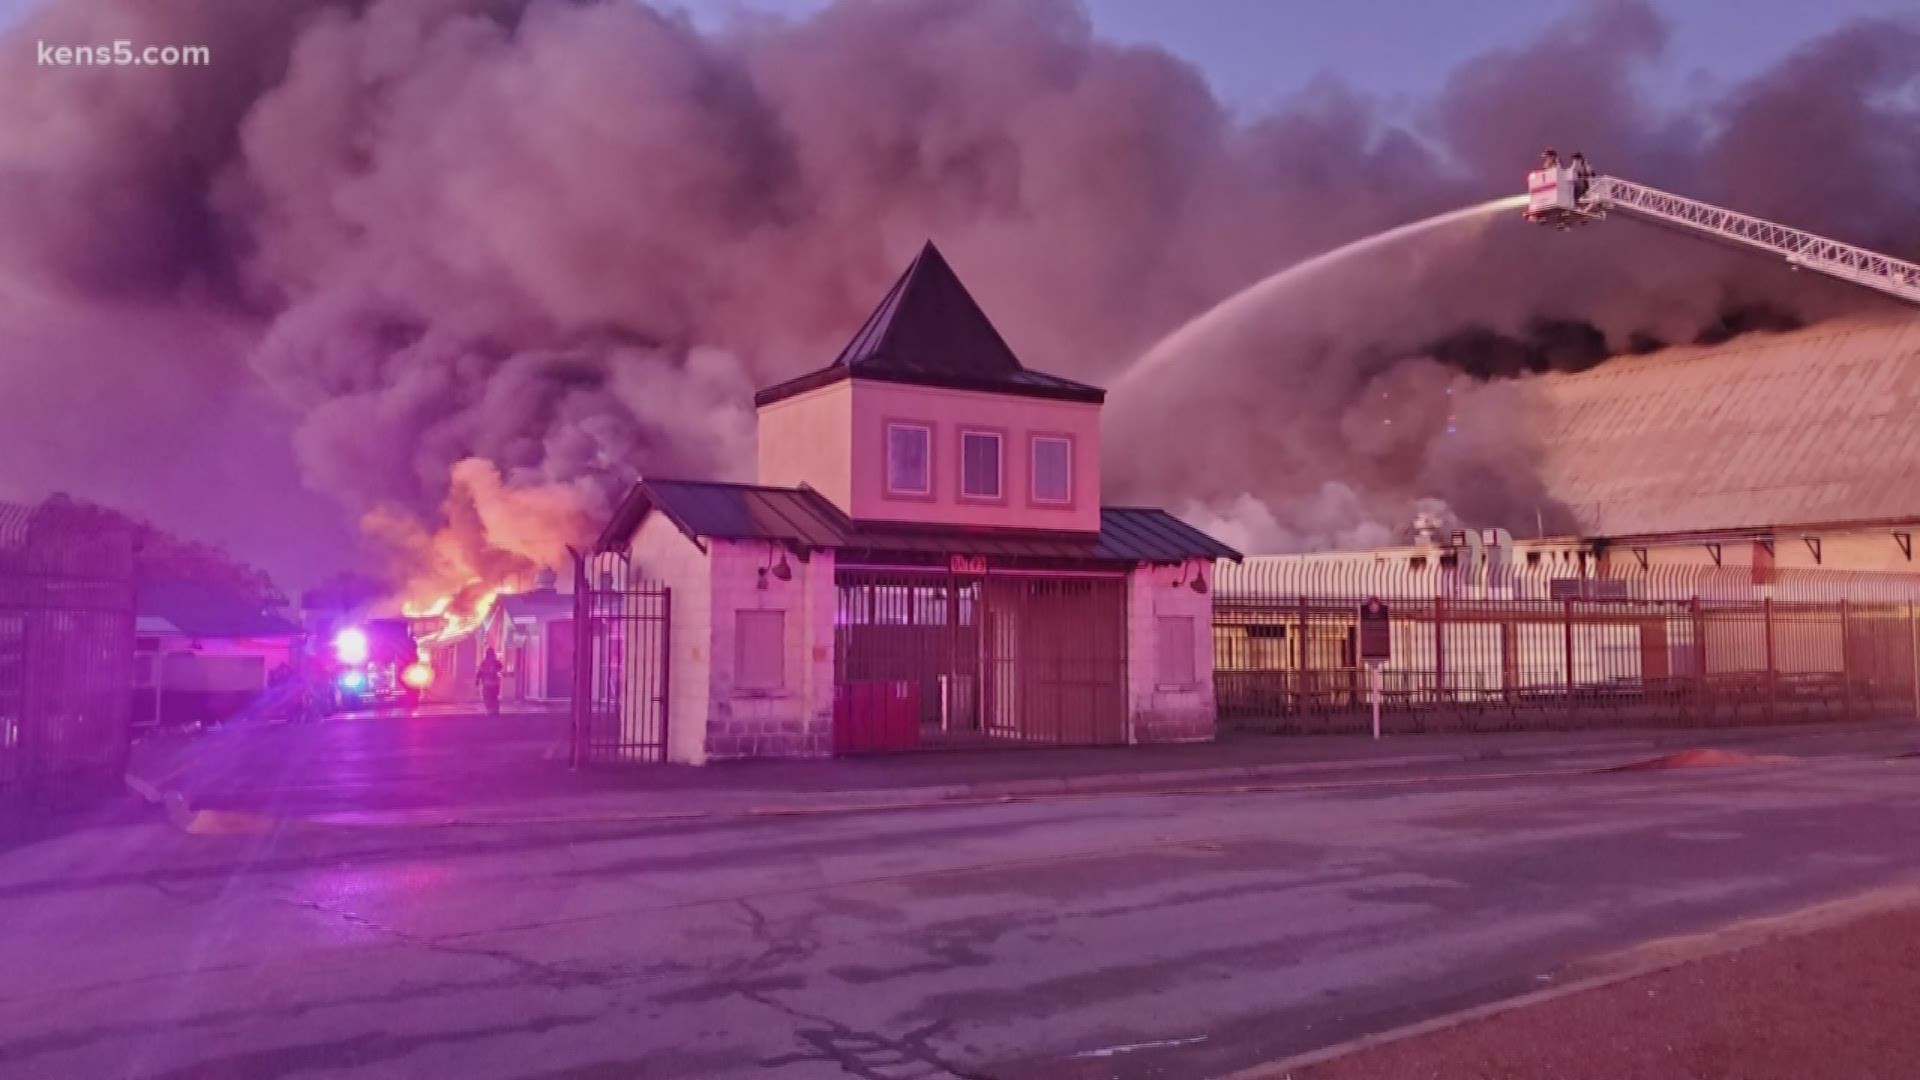 Weeks after a fire swept through parts of the Wurstfest grounds, the Lions Club of New Braunfels says they'll be ready for the 2020 event.